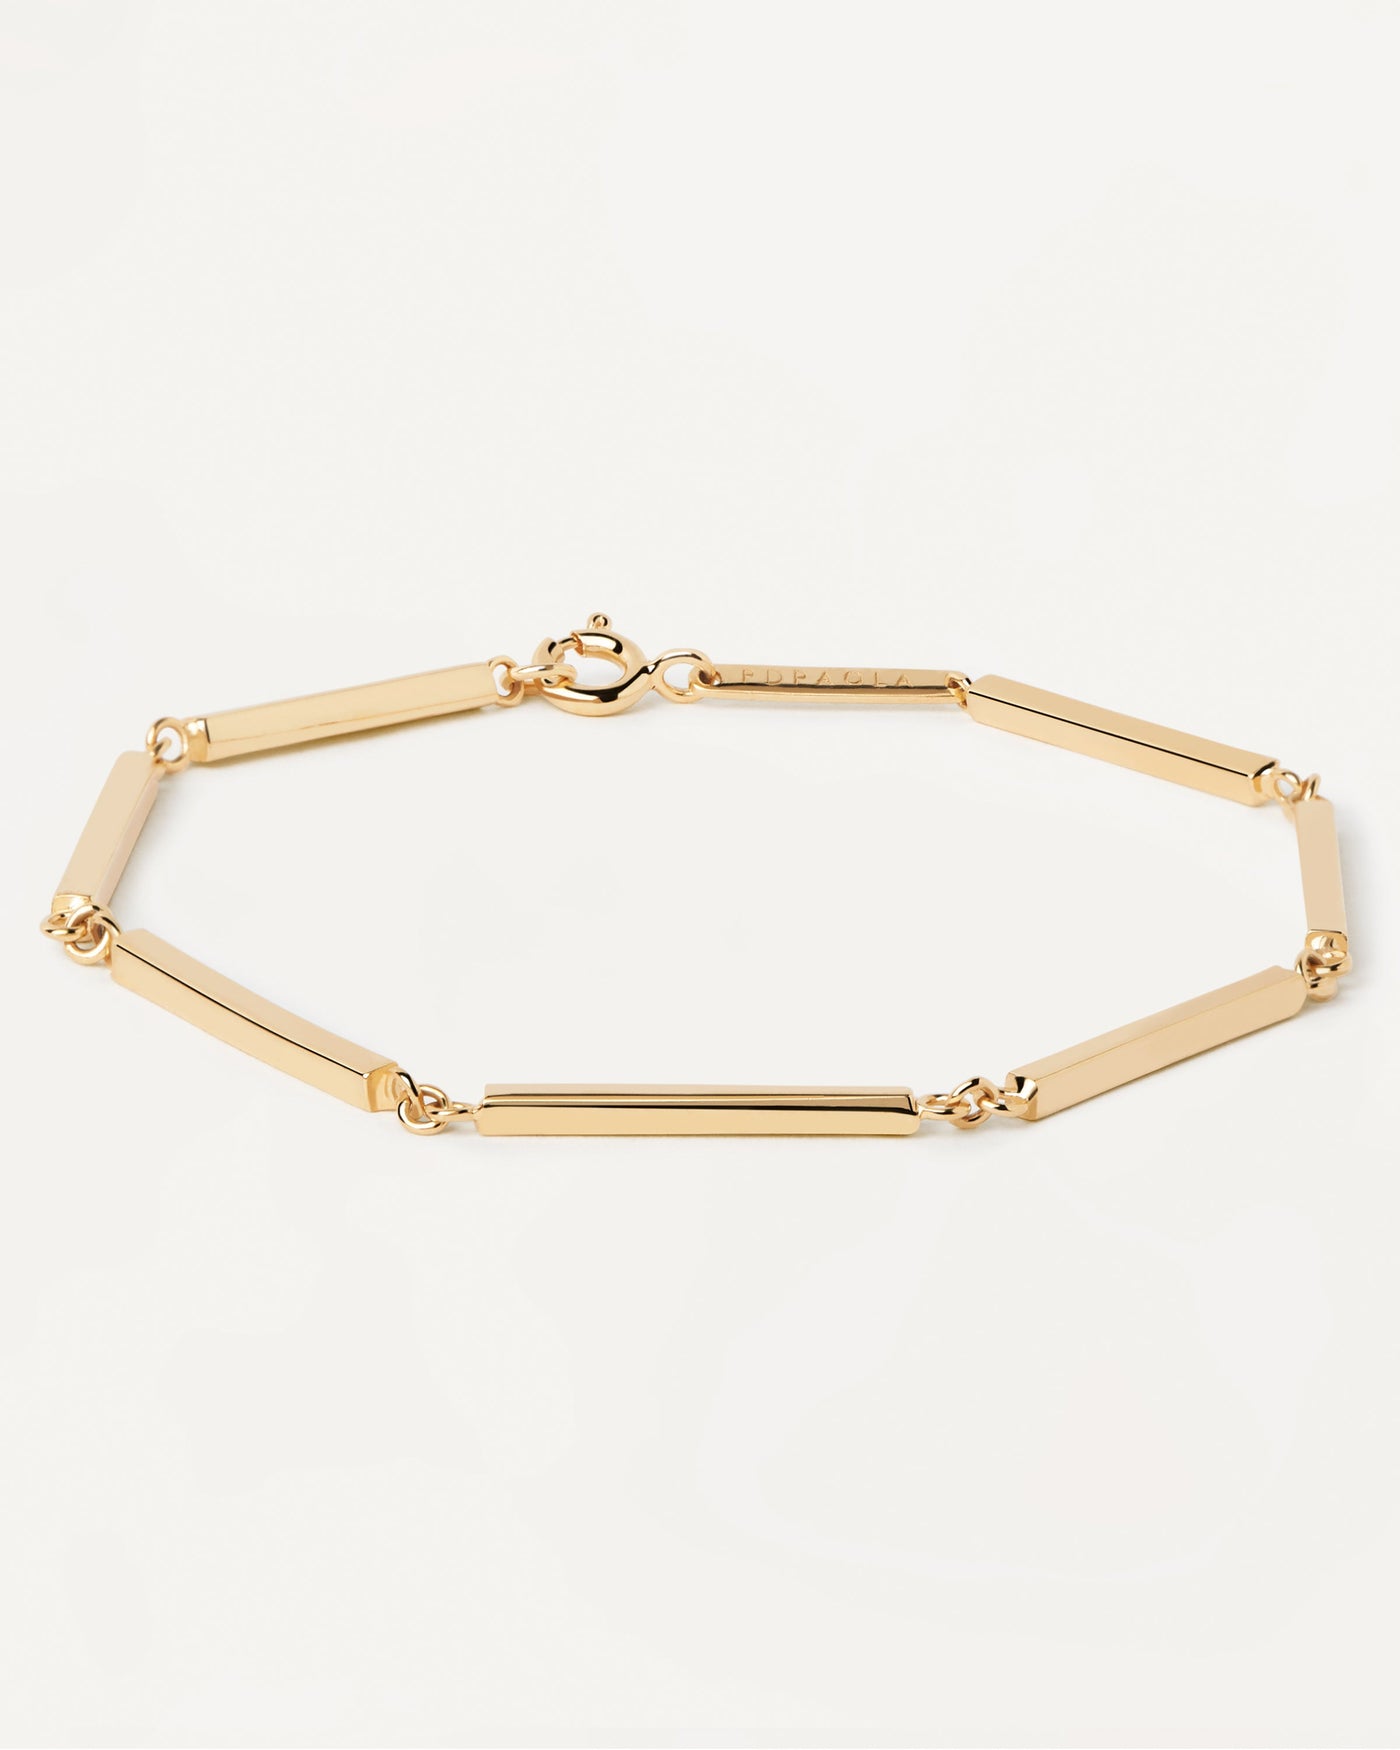 2023 Selection | Bar Chain Bracelet. Articulated bar-chain bracelet in plain gold-plated silver. Get the latest arrival from PDPAOLA. Place your order safely and get this Best Seller. Free Shipping.